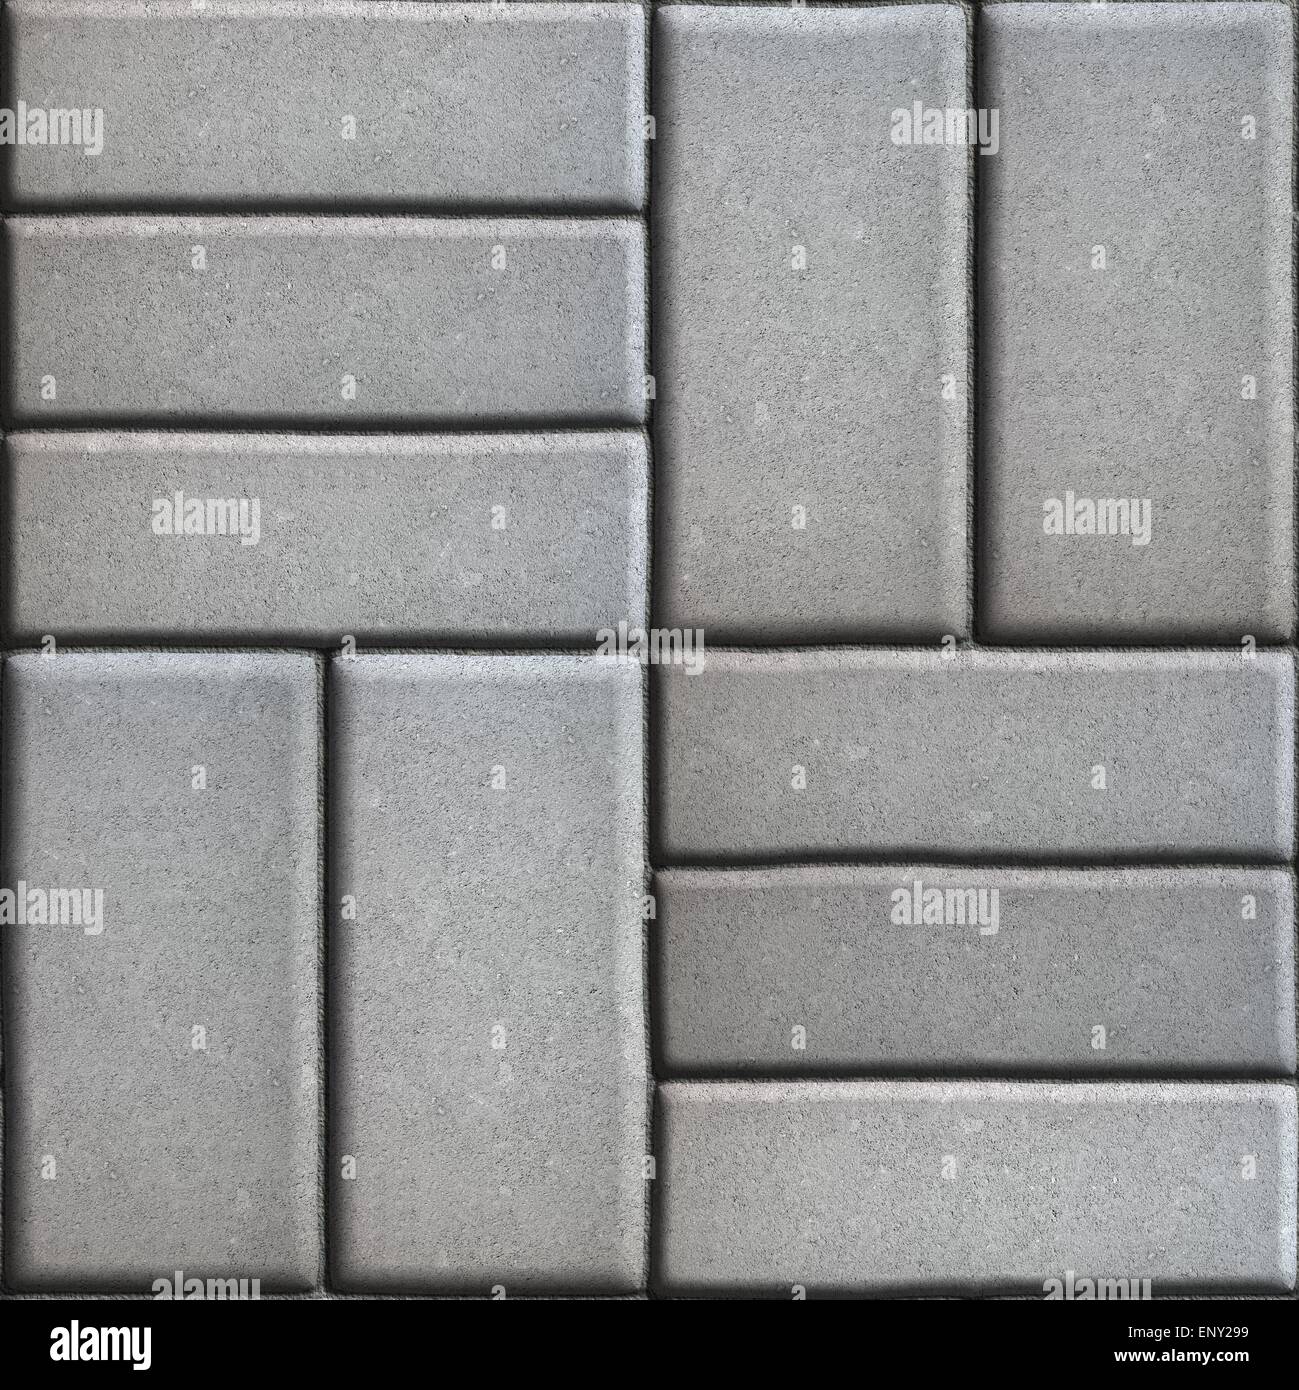 Gray Pave Slabs Rectangles Arranged Perpendicular to Each other Two or Three Pieces. Stock Photo